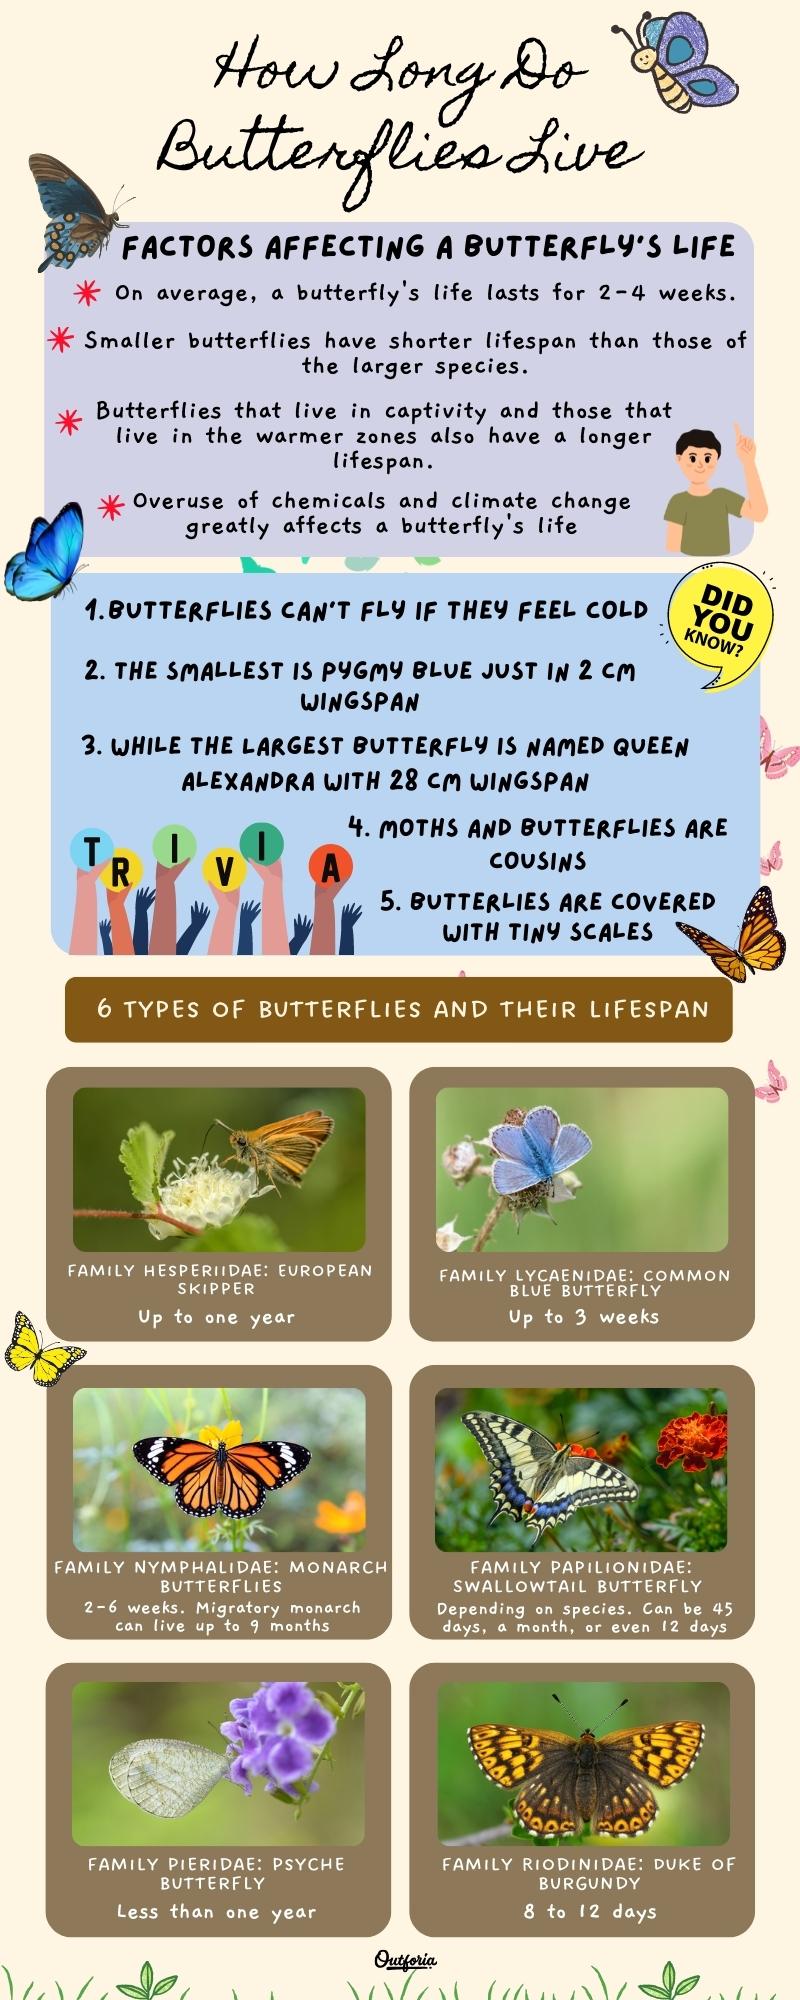 chart of the different types of butterflies with their lifespans, factors affecting a butterflies' life, and fun facts